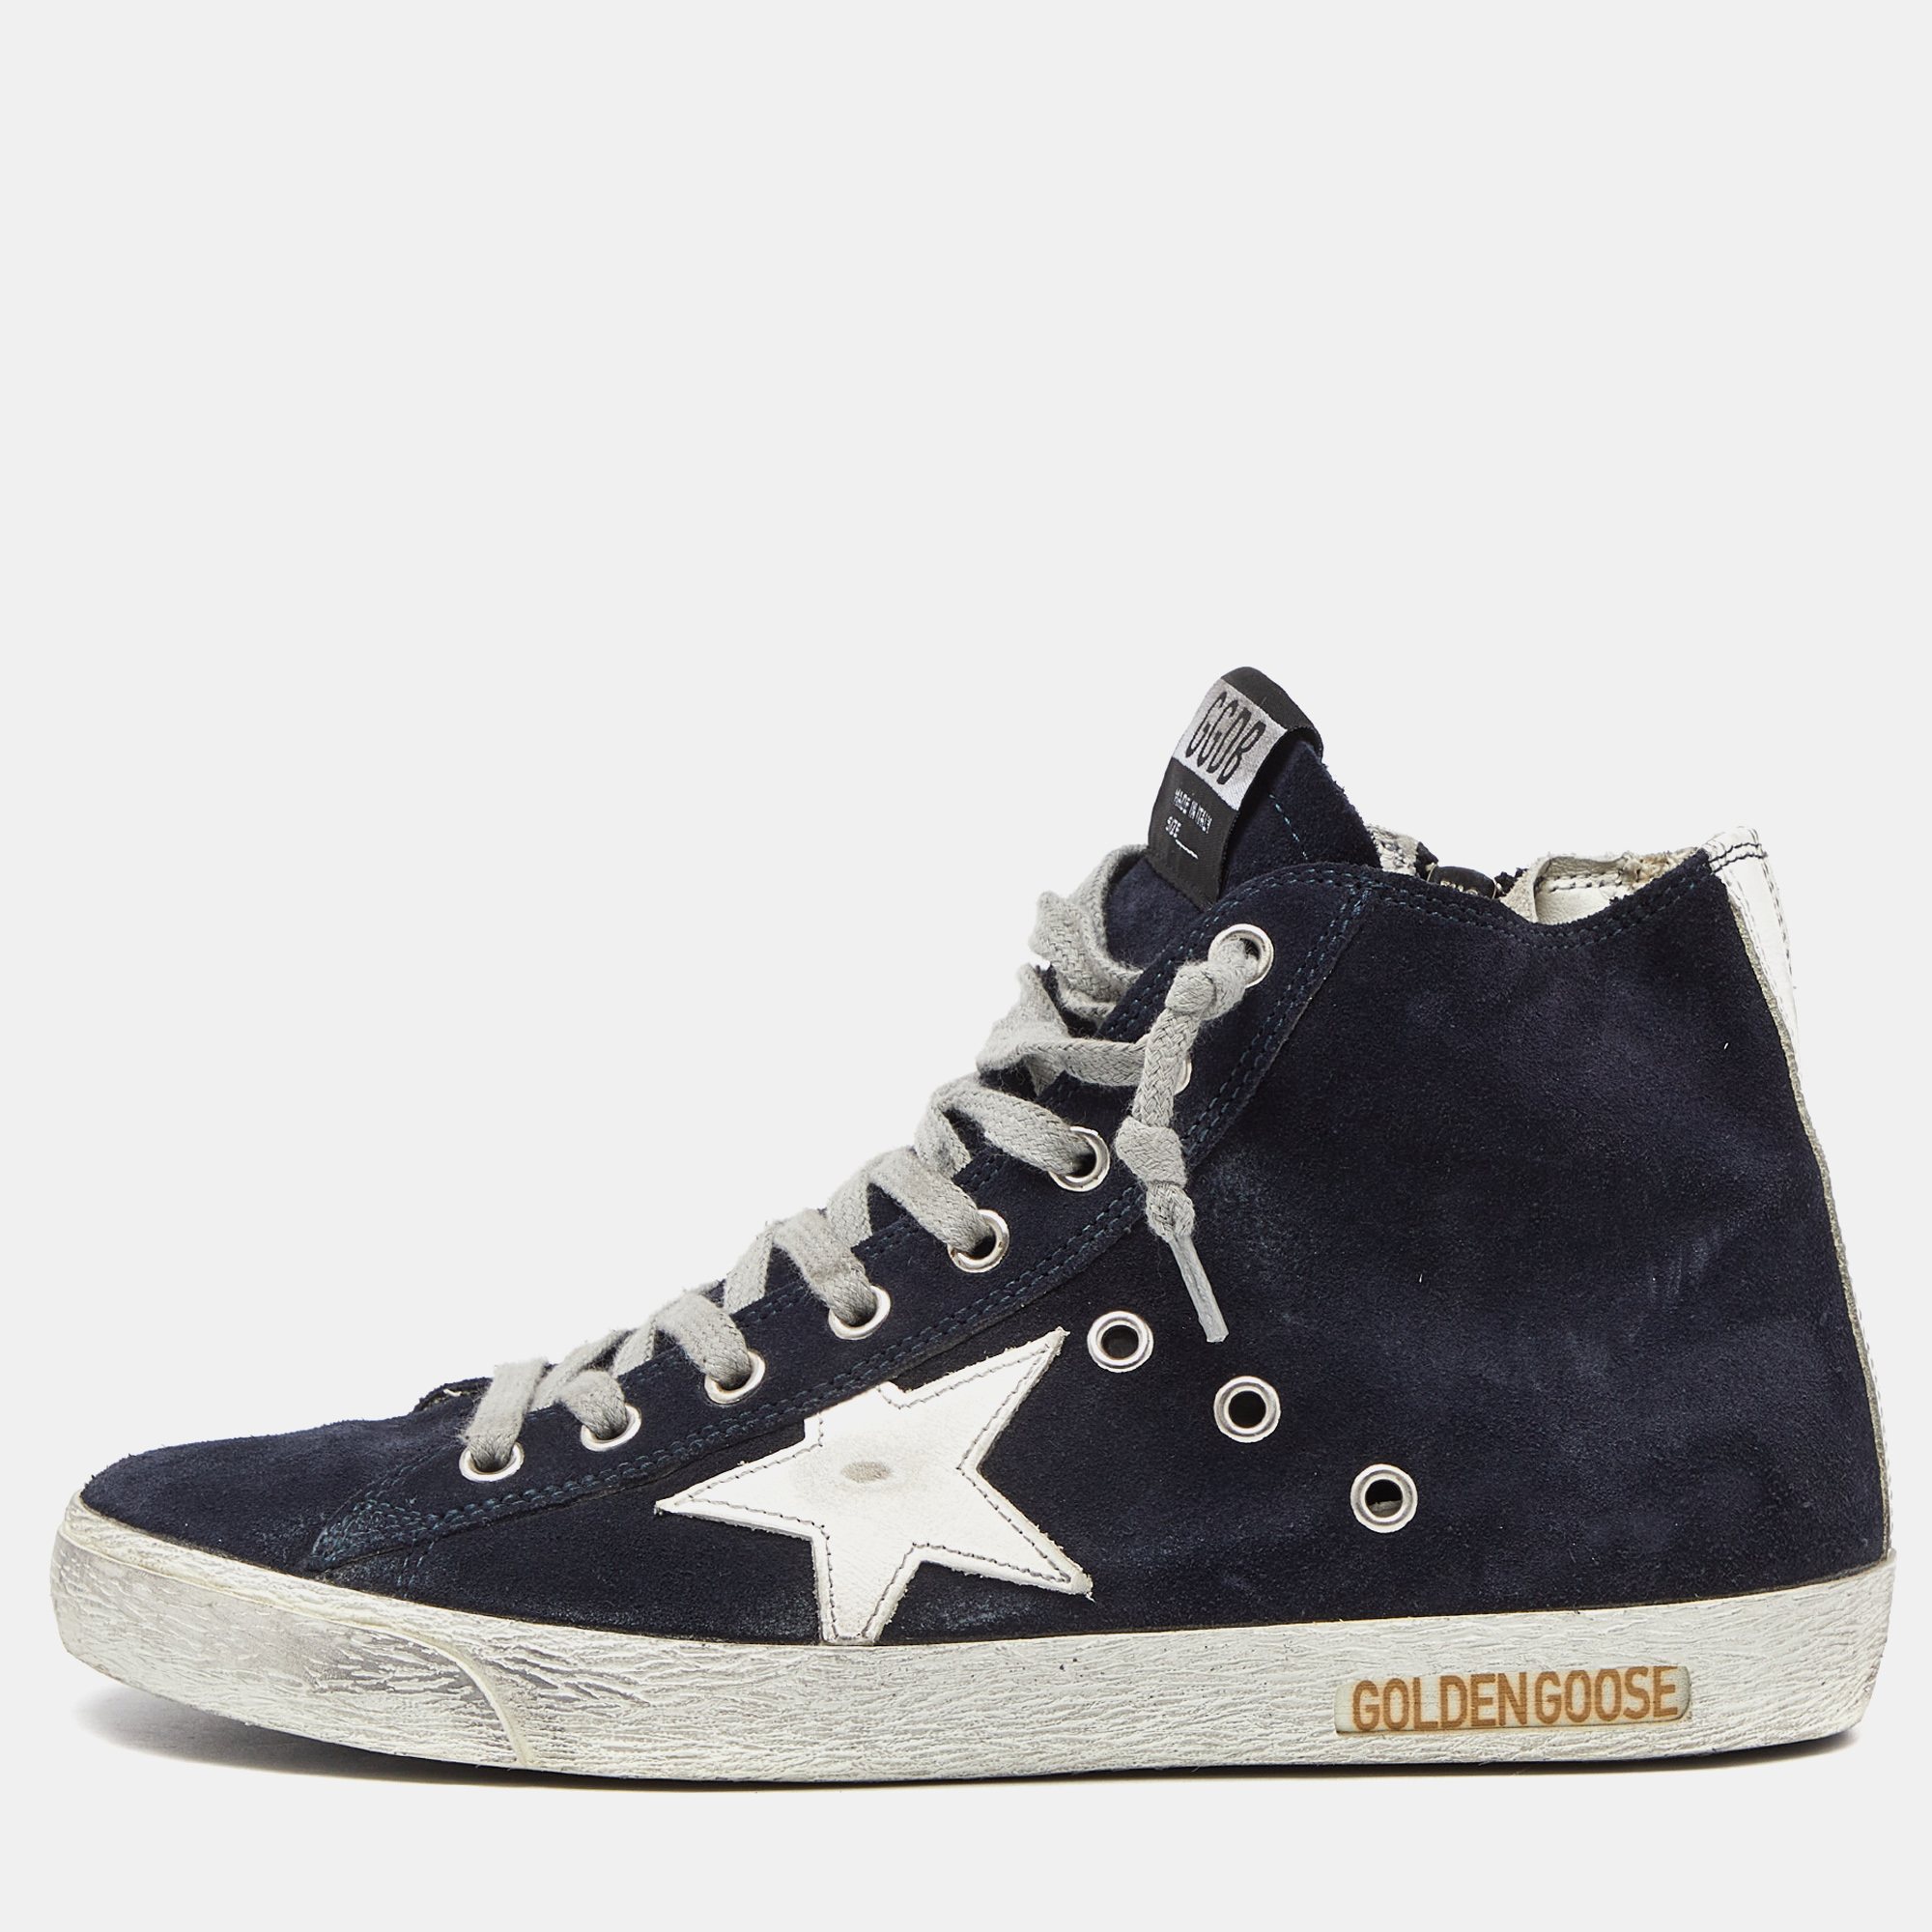 Golden goose blue suede francy lace up high top sneakers size 39